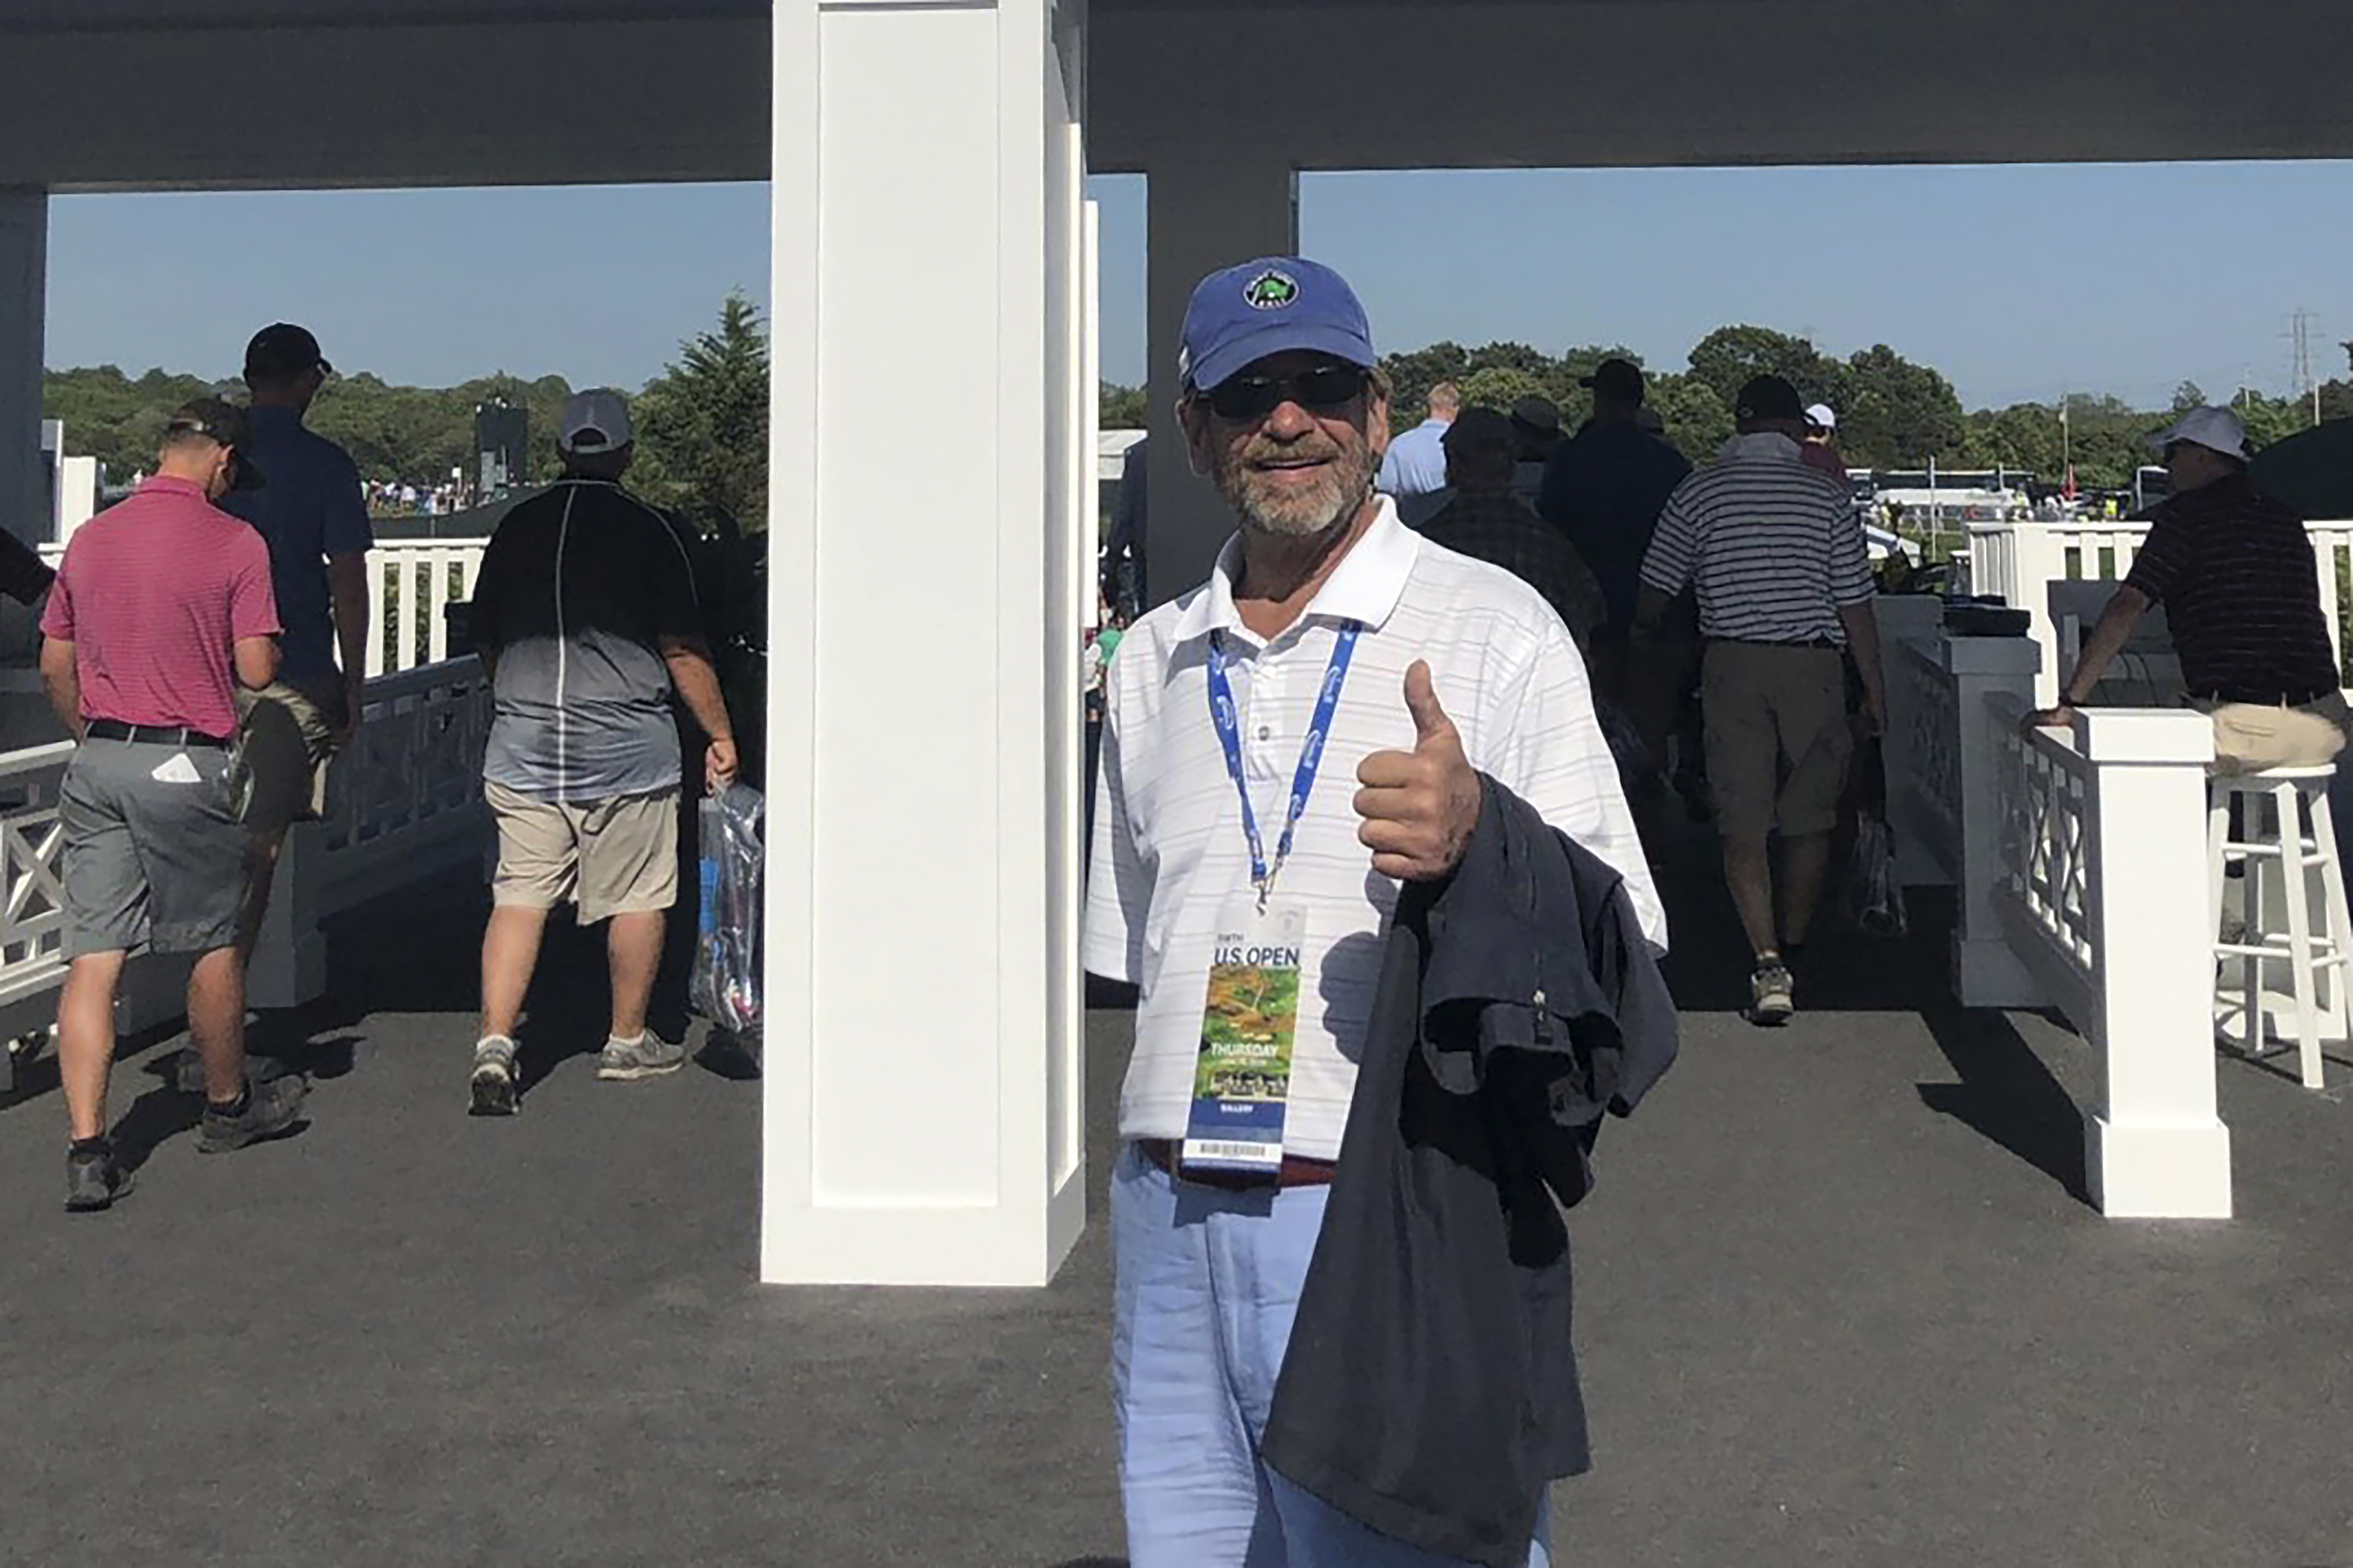 Tom Randele at an entrance to the 2018 US Open Golf Tournament at Shinnecock Hills Golf Club. 